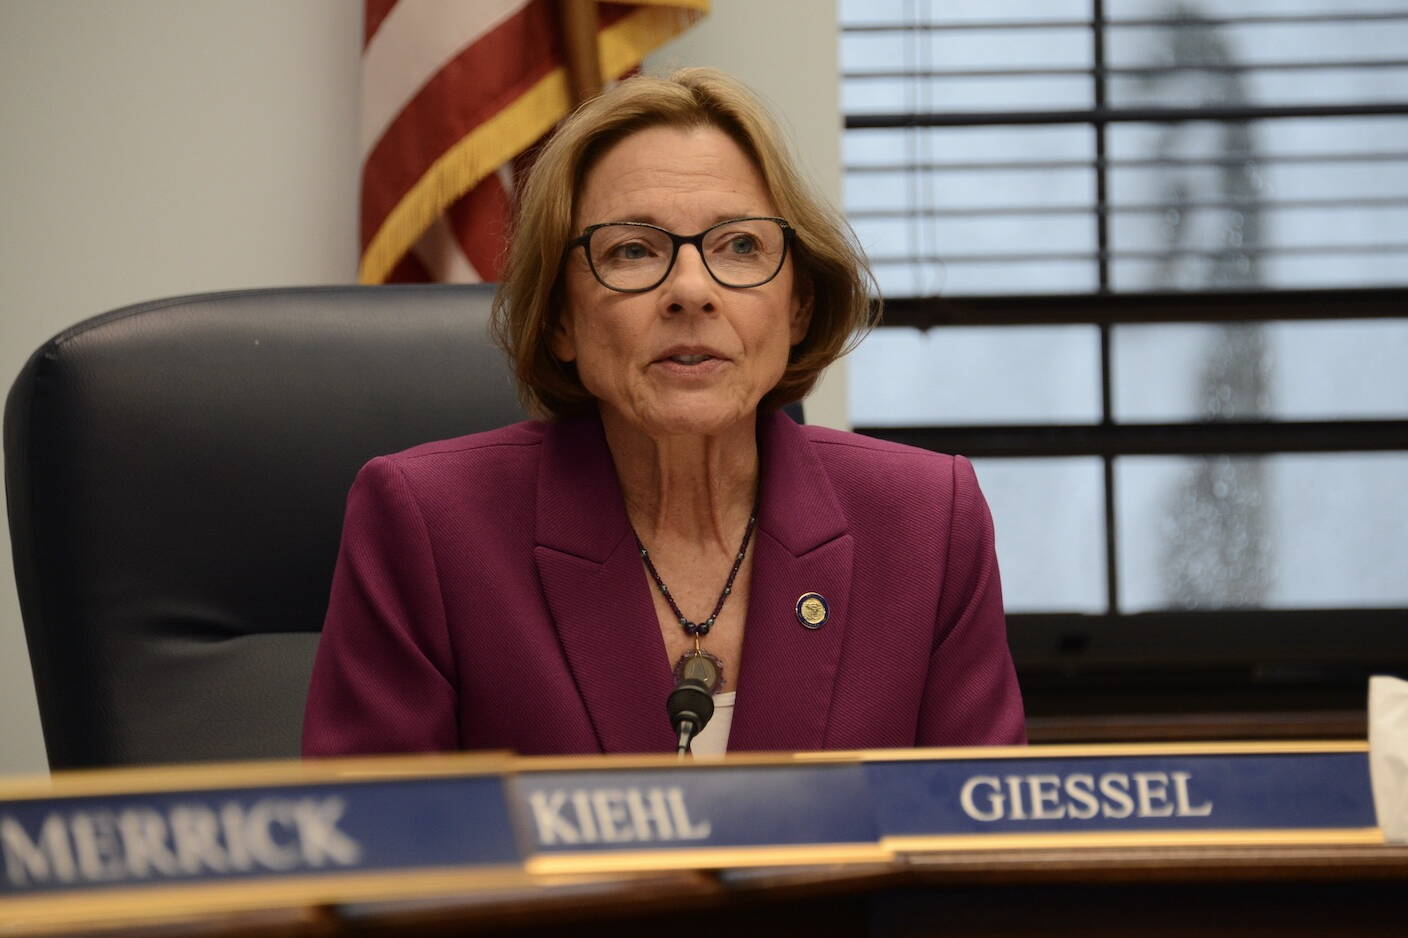 Sen. Cathy Giessel, R-Anchorage, speaks during a news conference on Wednesday, March 1, 2023. (James Brooks/Alaska Beacon)